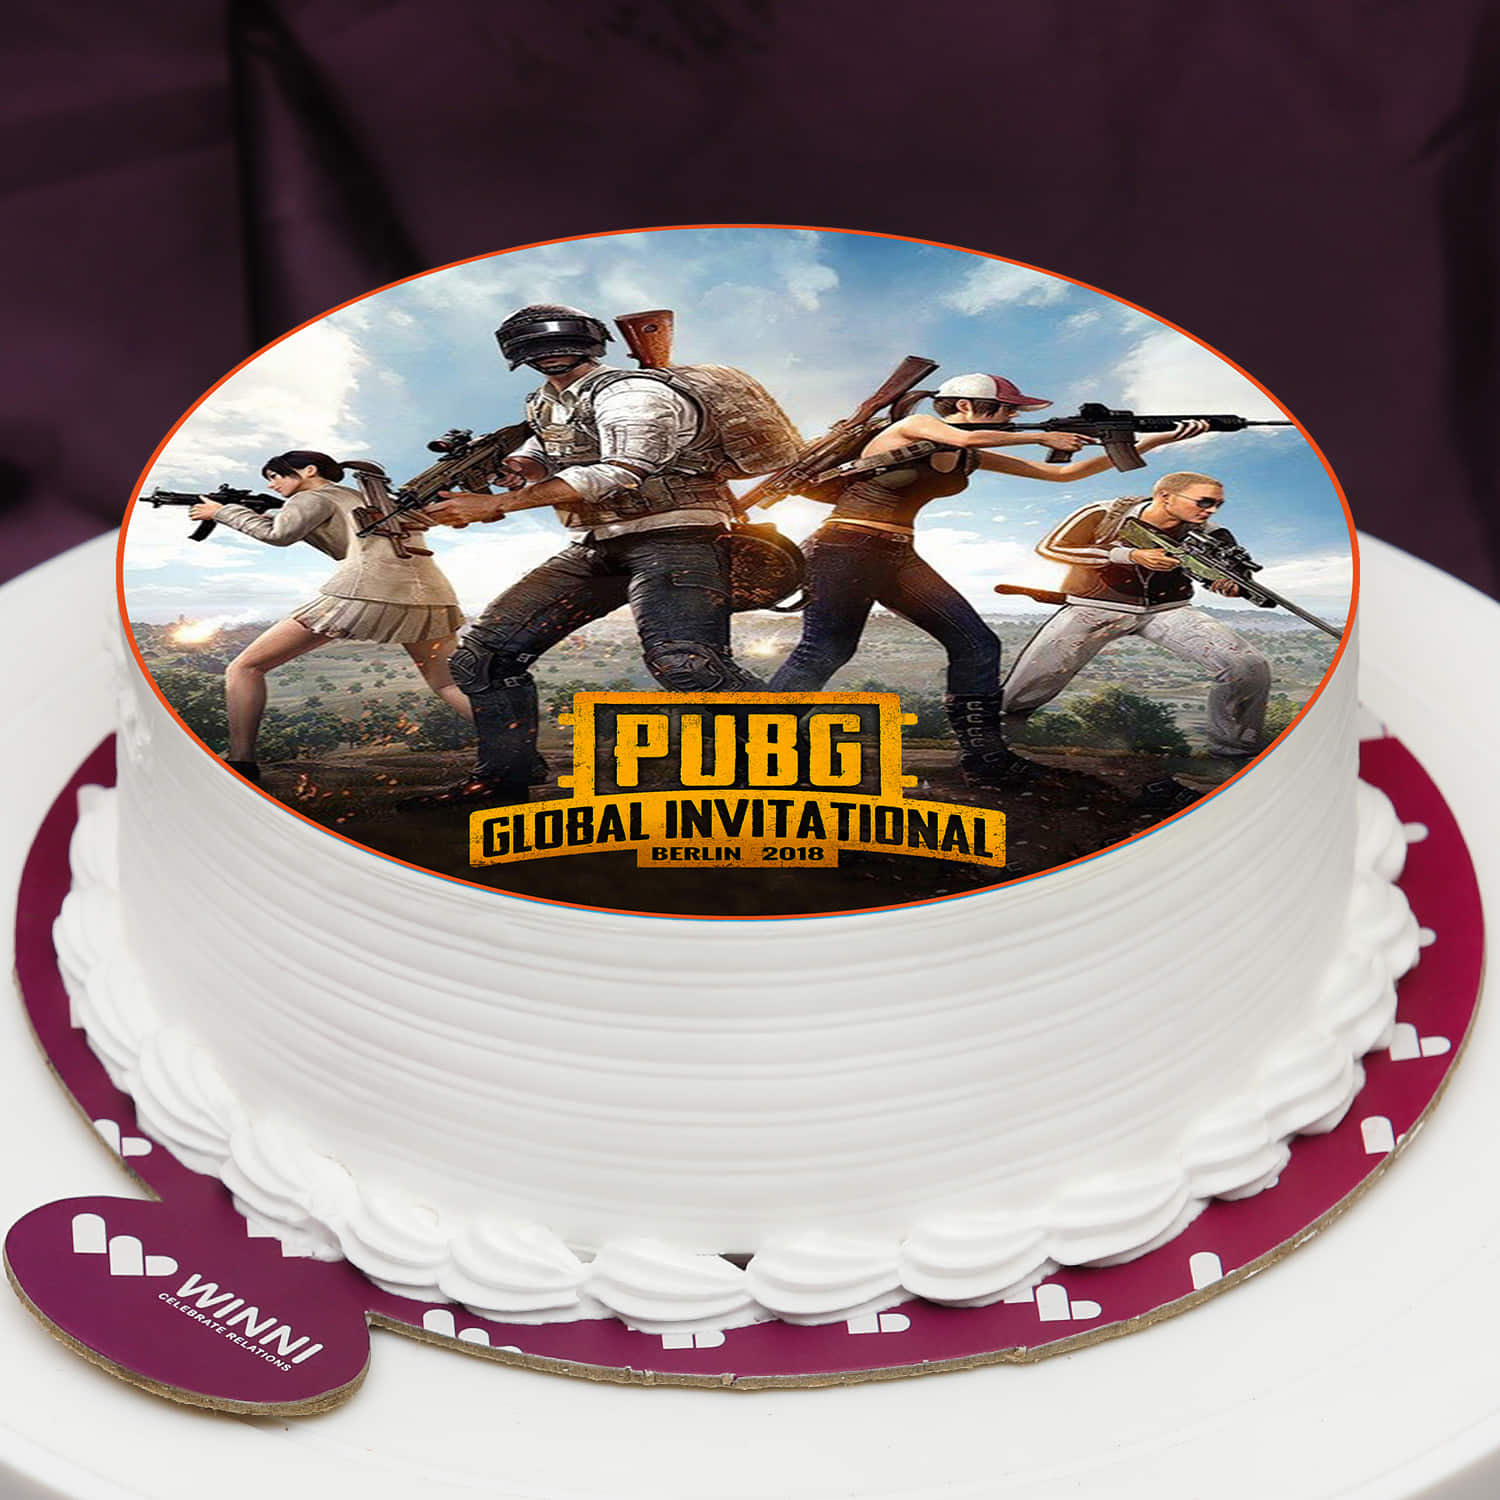 Customized PUBG cake - The Baker's Table